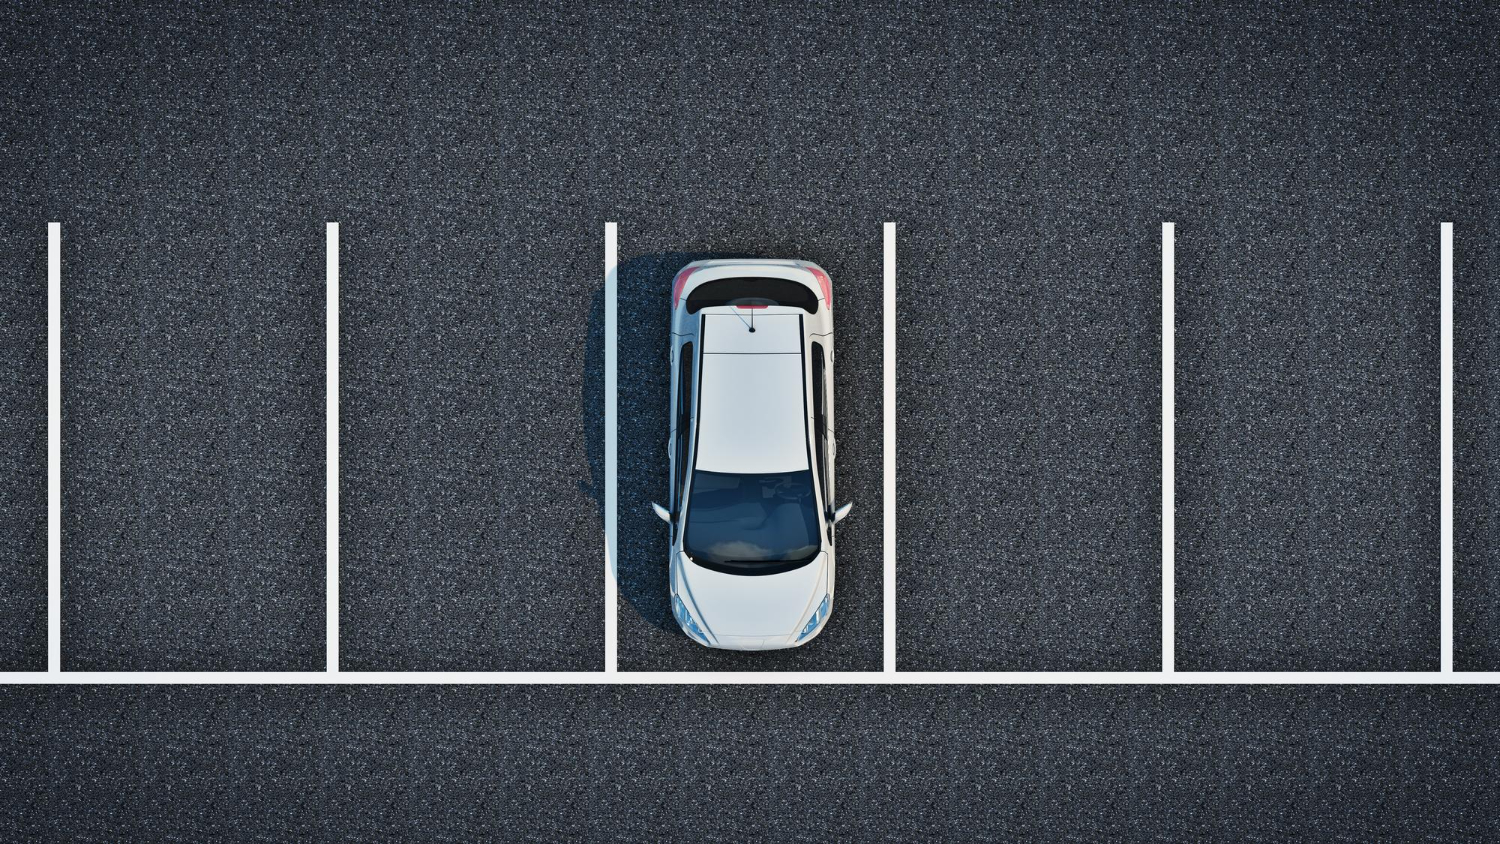 Parking Layout Considerations - Maximizing Efficiency and Safety